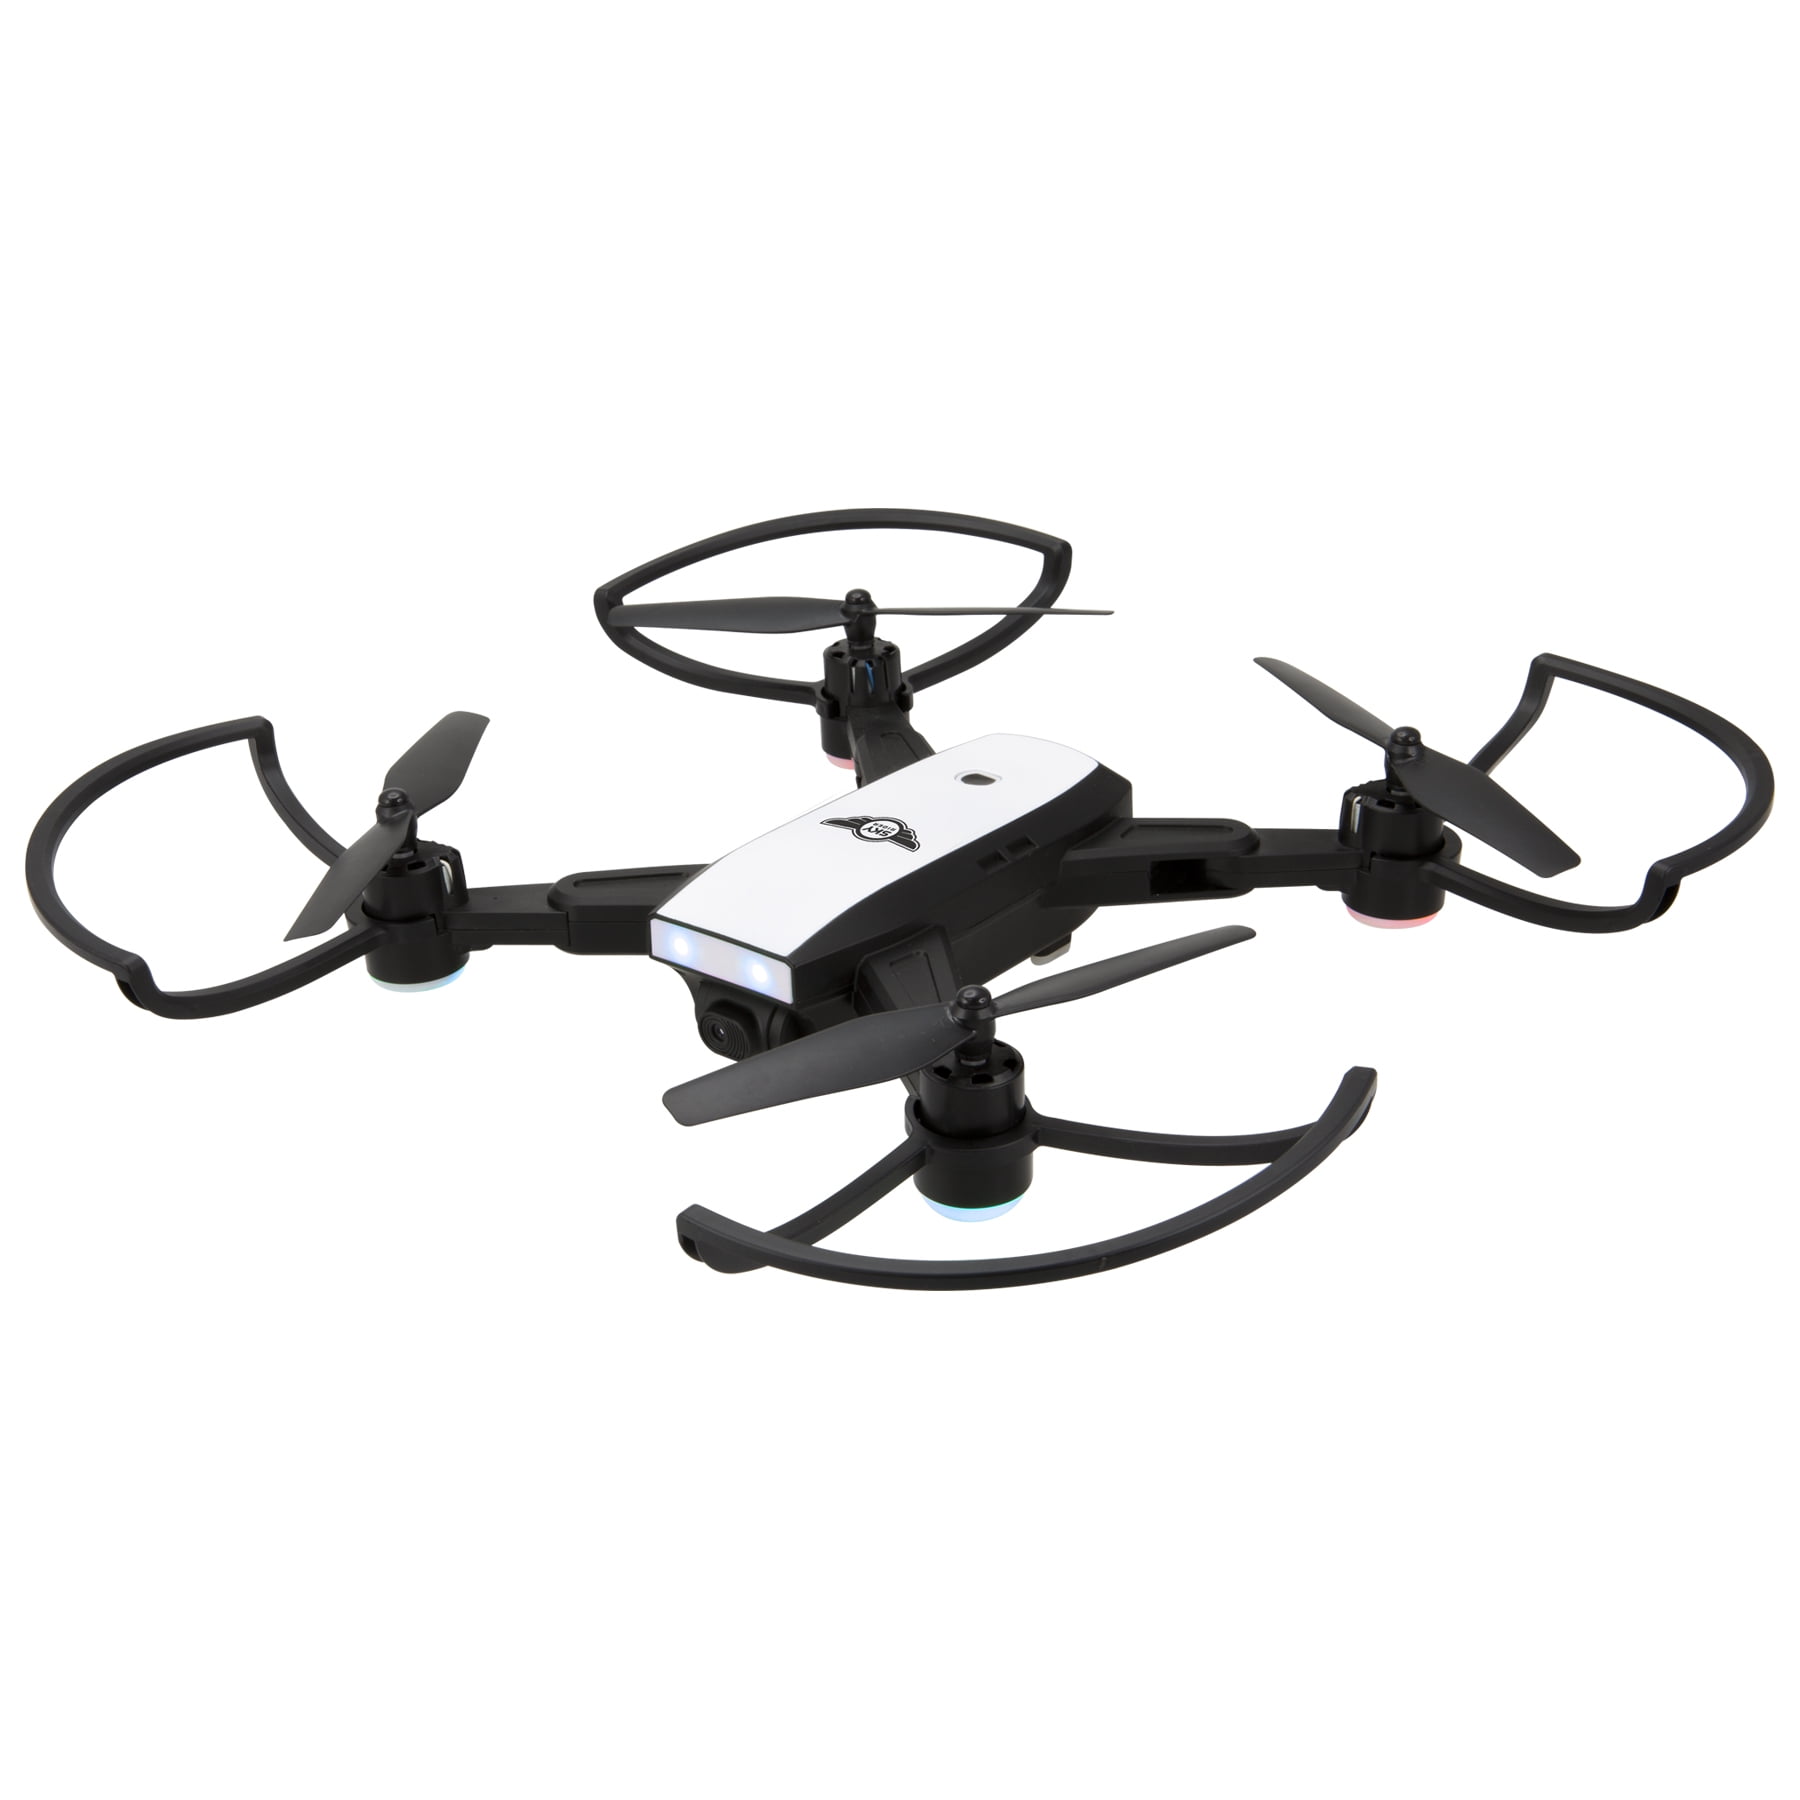 bille Farvel Glad Sky Rider Raven 2 Foldable Drone with GPS and Wi-Fi Camera, DRWG530B, Black  - Walmart.com